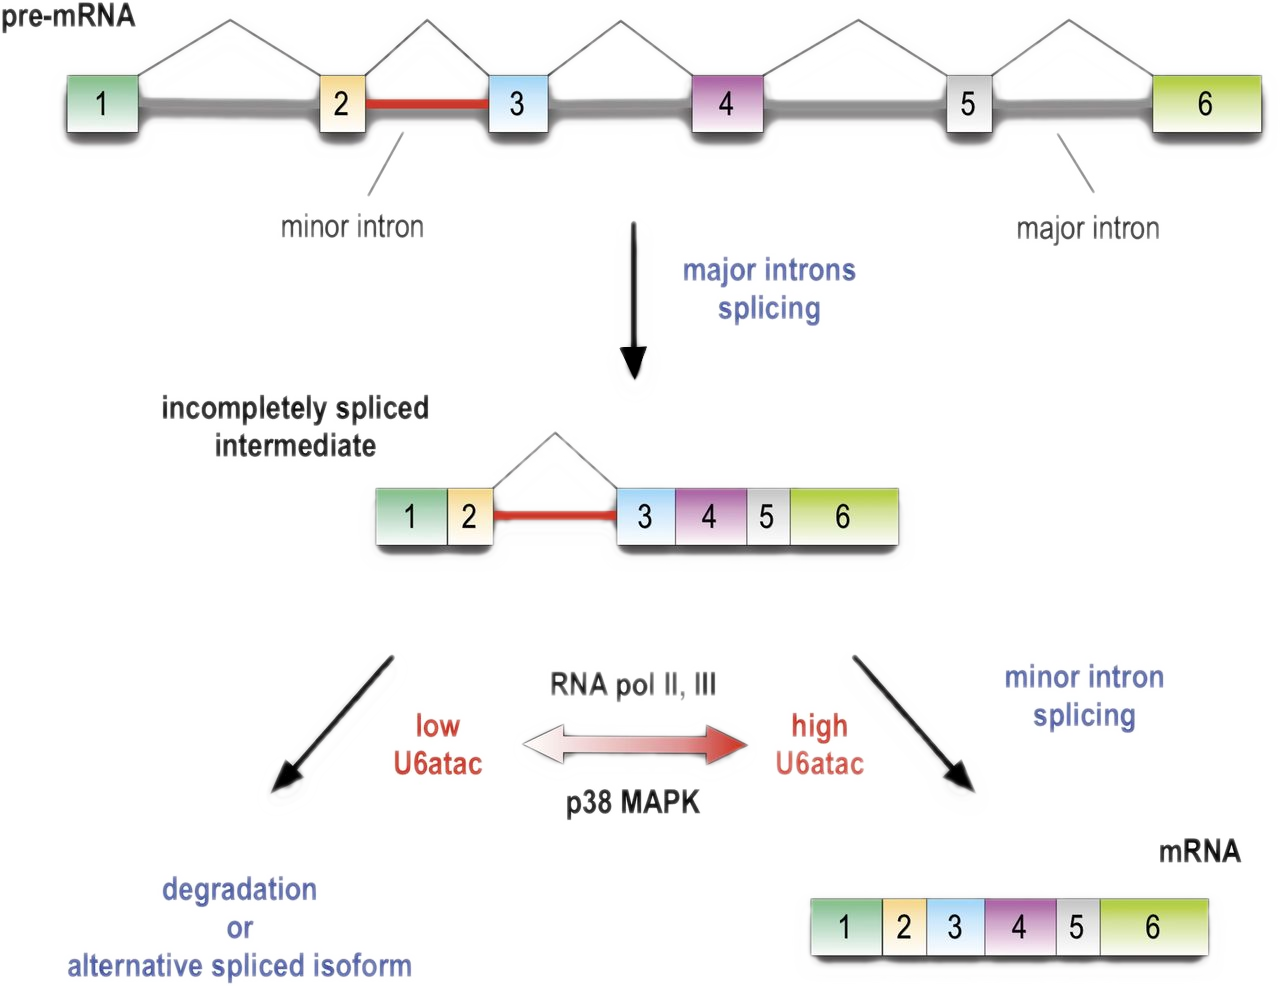 Minor introns are embedded molecular switches regulated by the abundance of highly unstable U6atac snRNA
In addition to containing typical (‘major’) introns, several hundred human genes also contain a single ‘minor’ intron, and a minor spliceosome is...